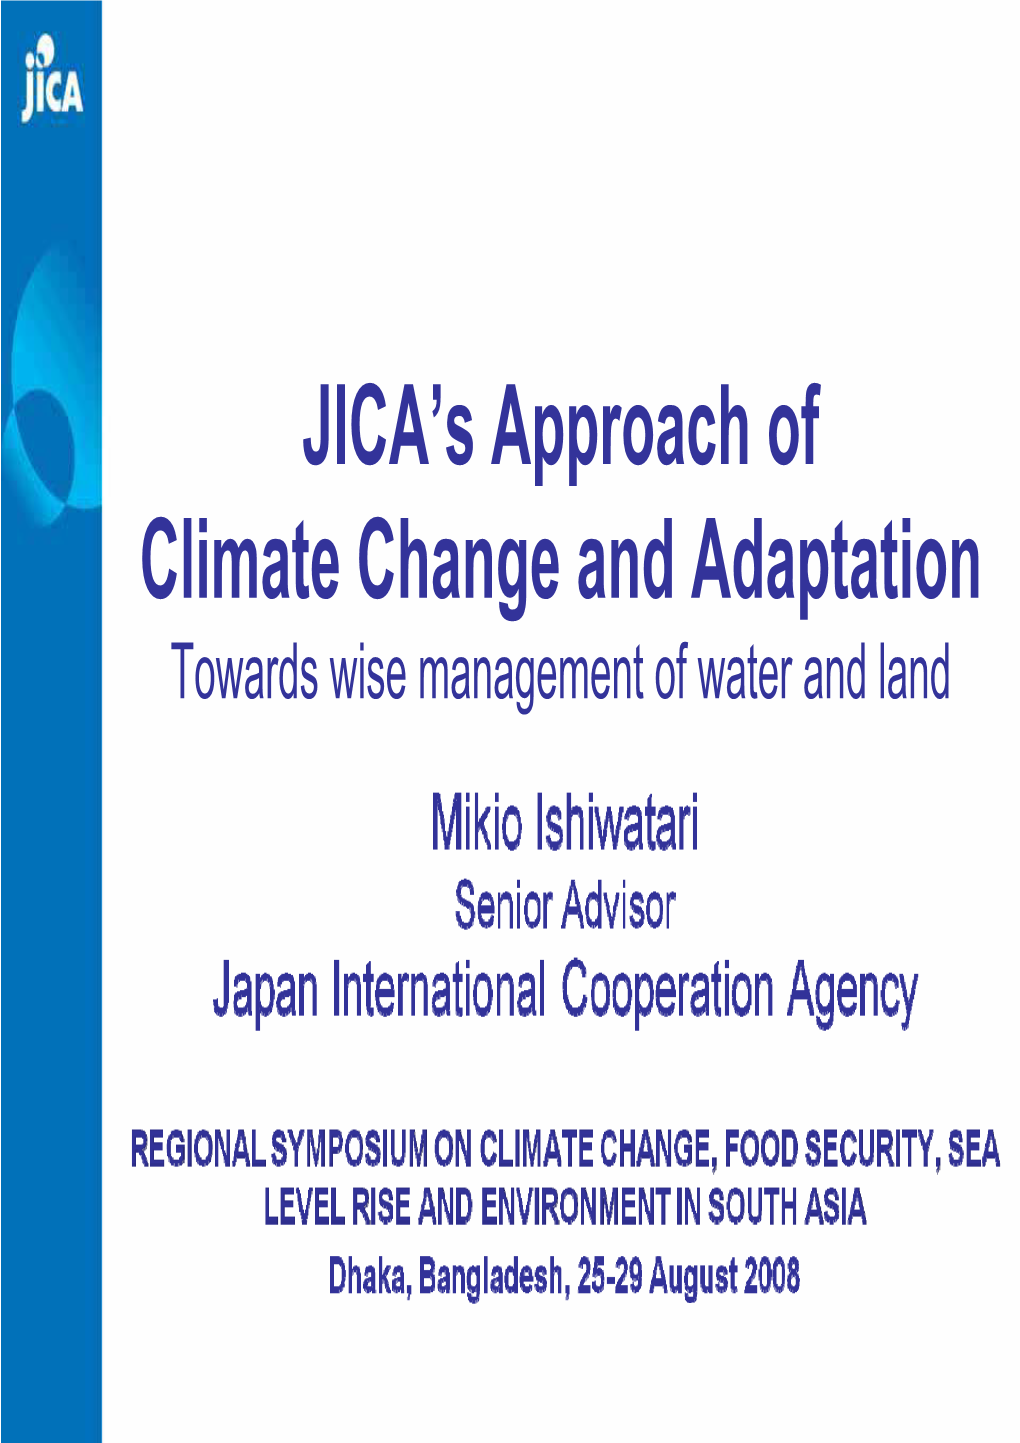 JICA's Approach of Climate Change and Adaptation